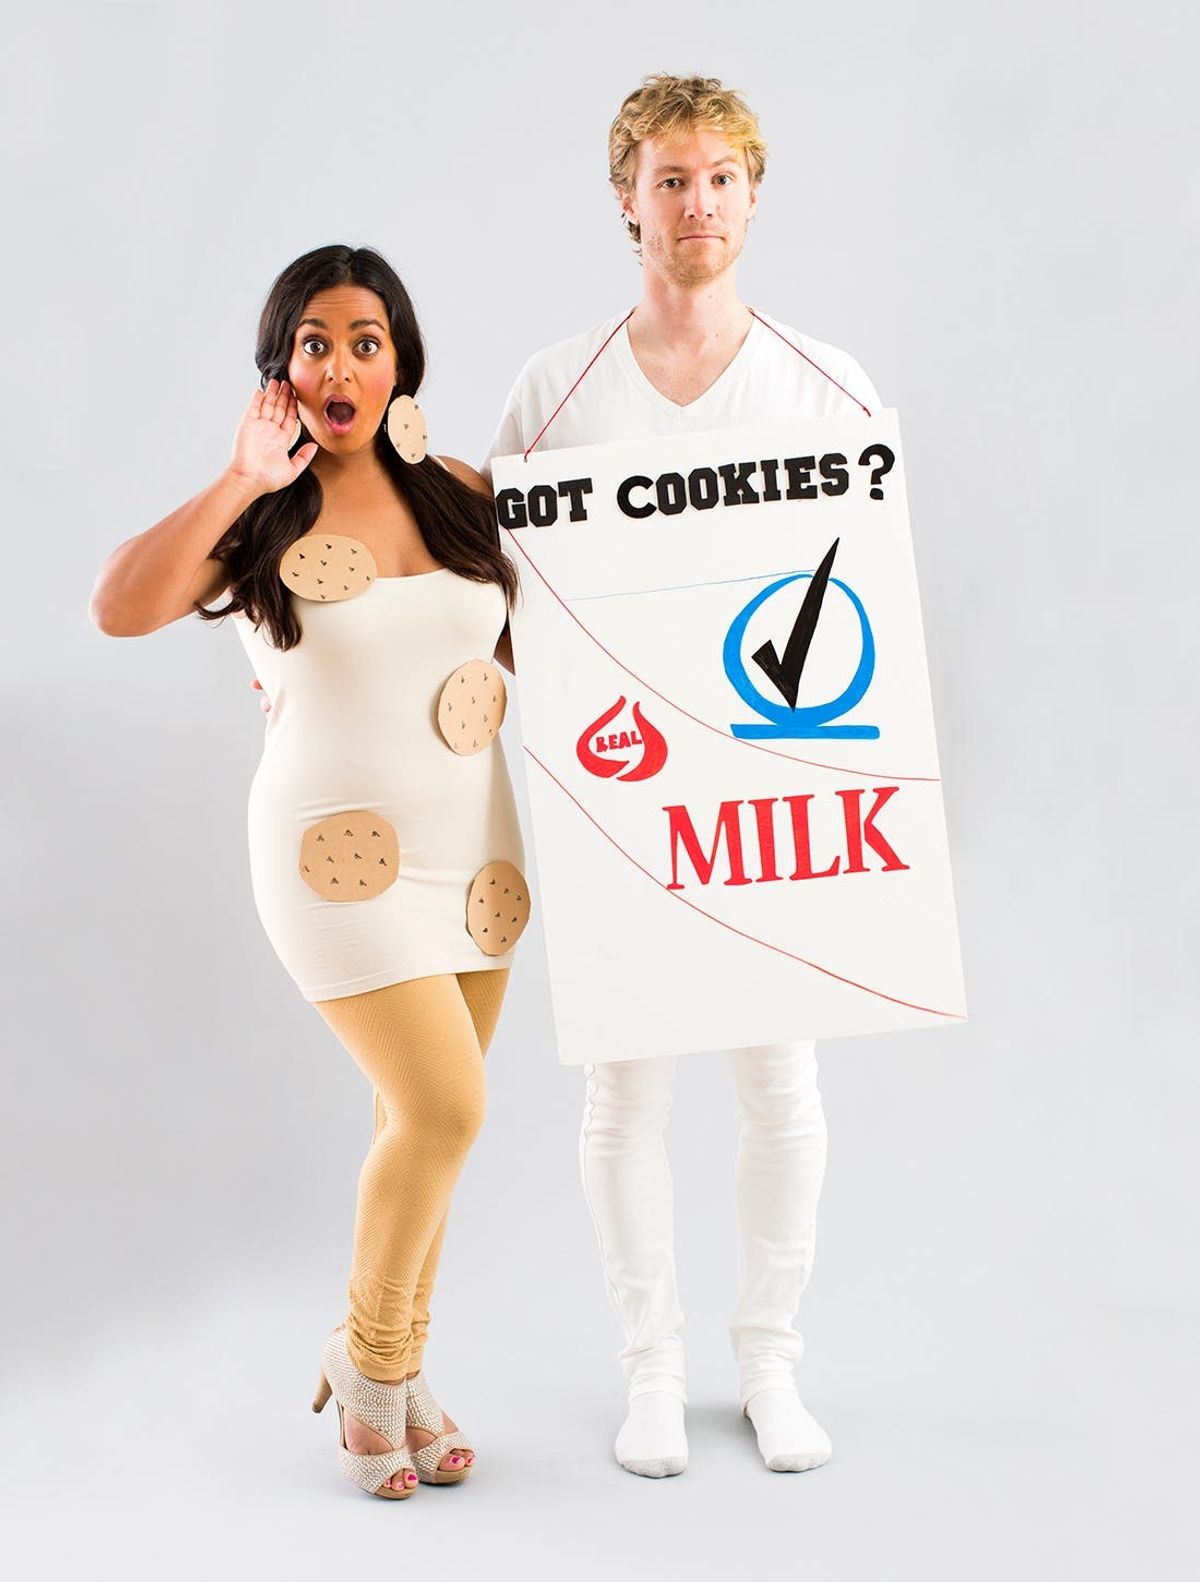 8 All-New DIY Couples Halloween Costumes